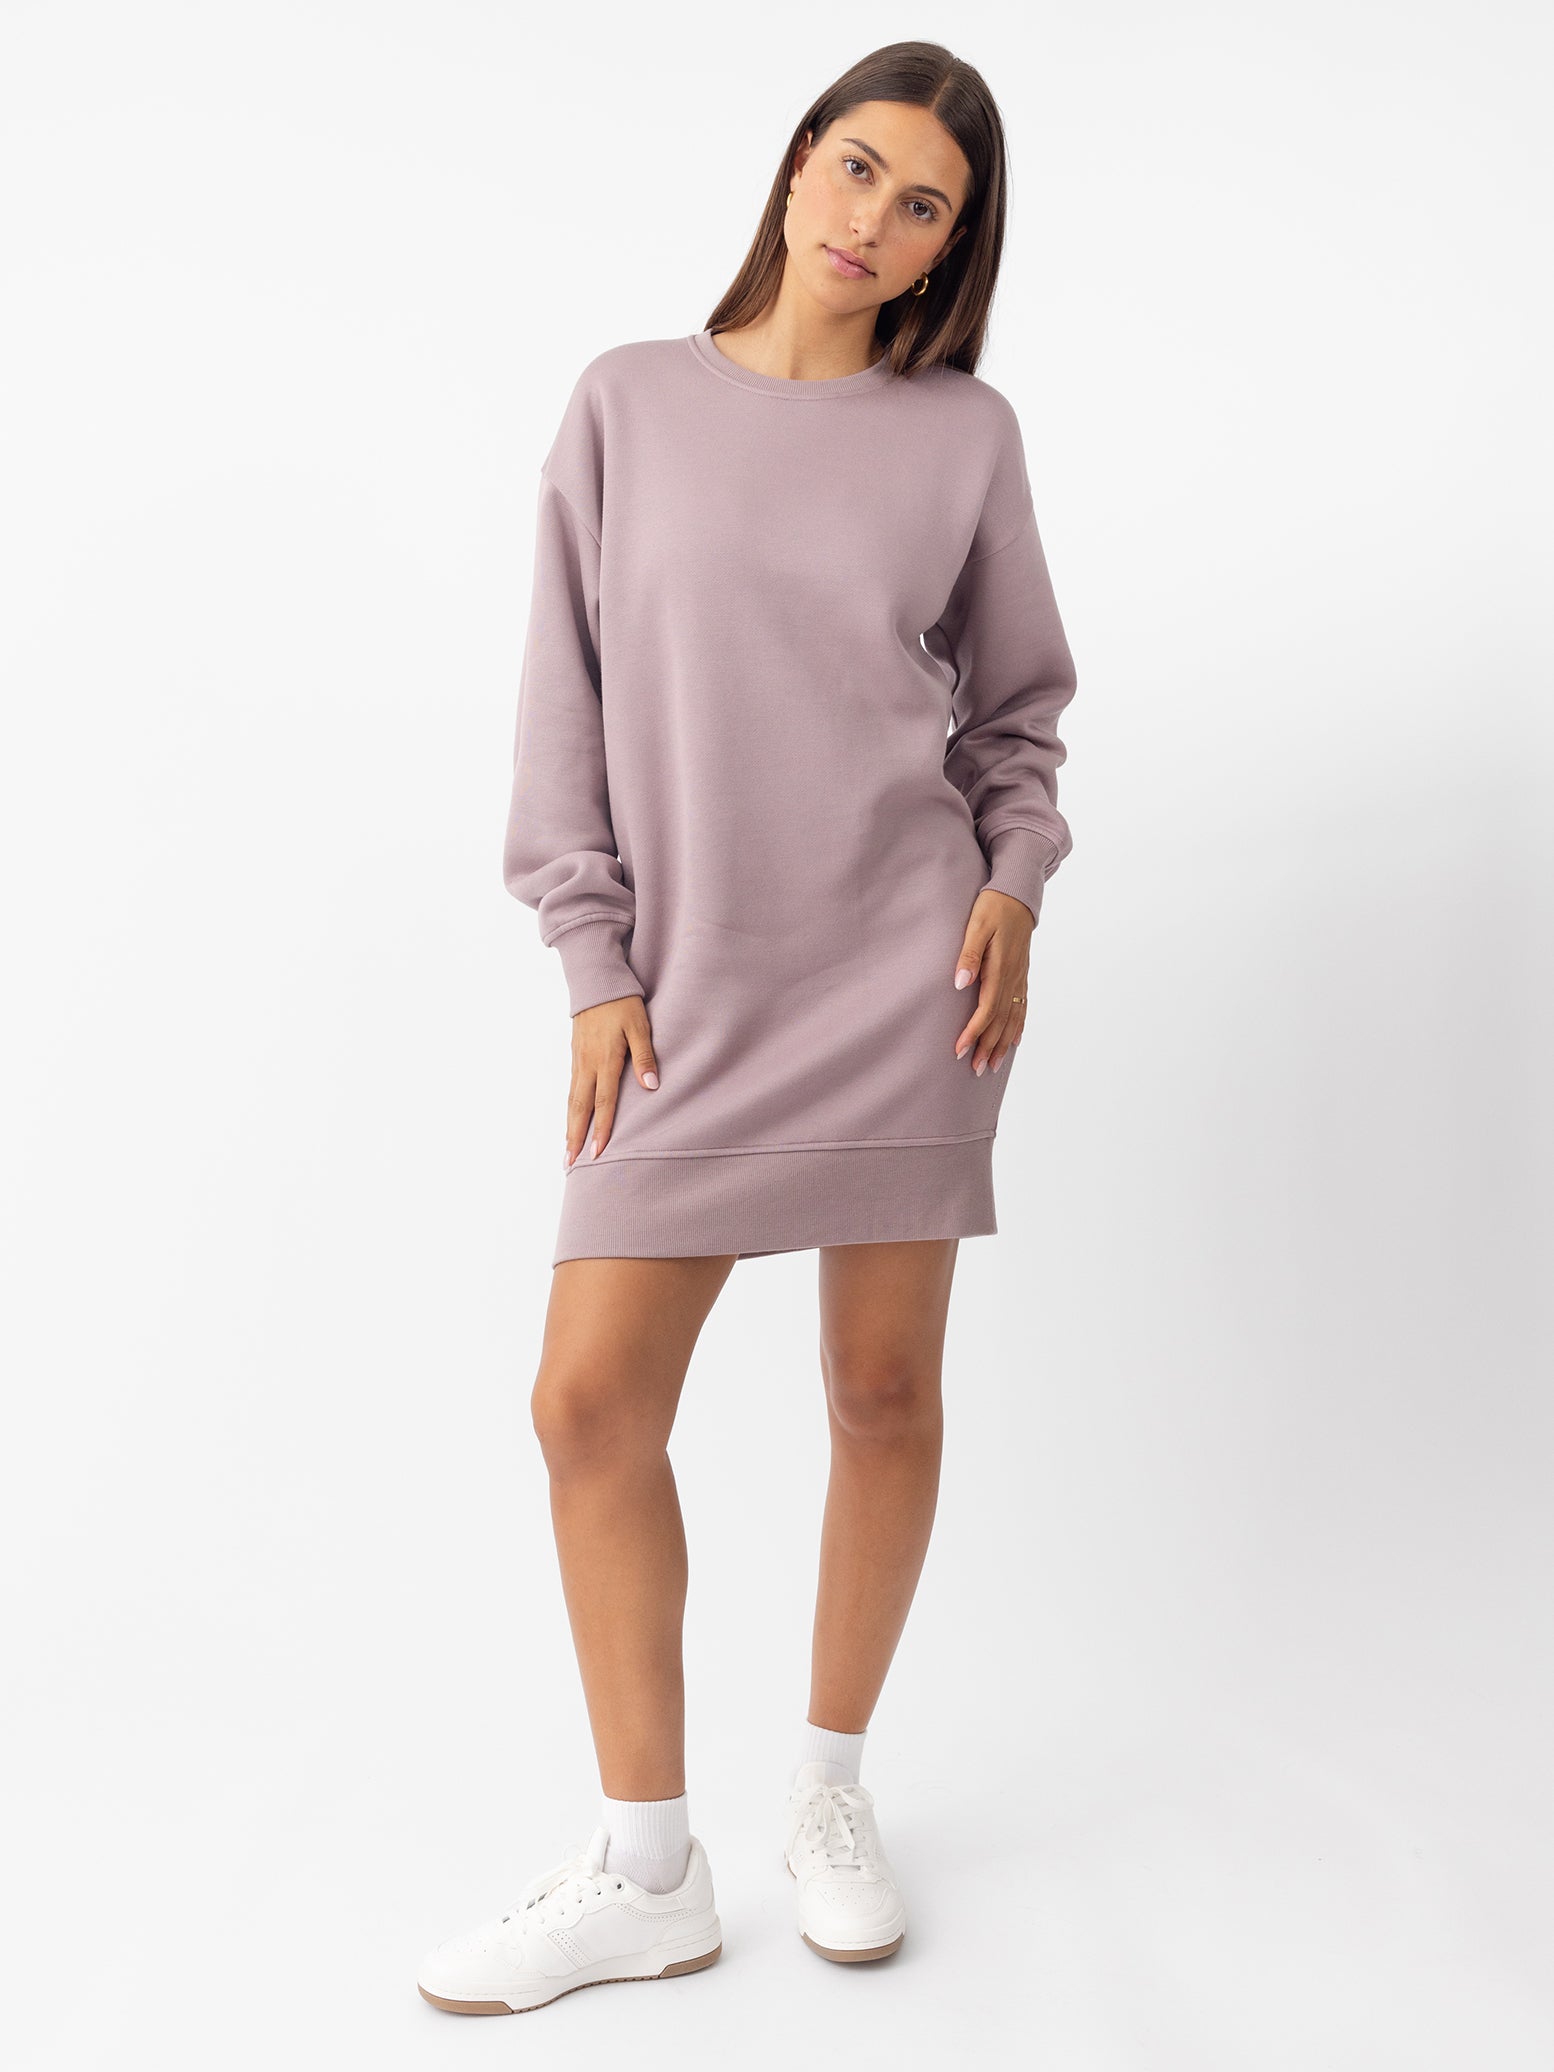 Woman wearing Dusty Orchid CityScape Crewneck Dress with white background |Color: Dusty Orchid